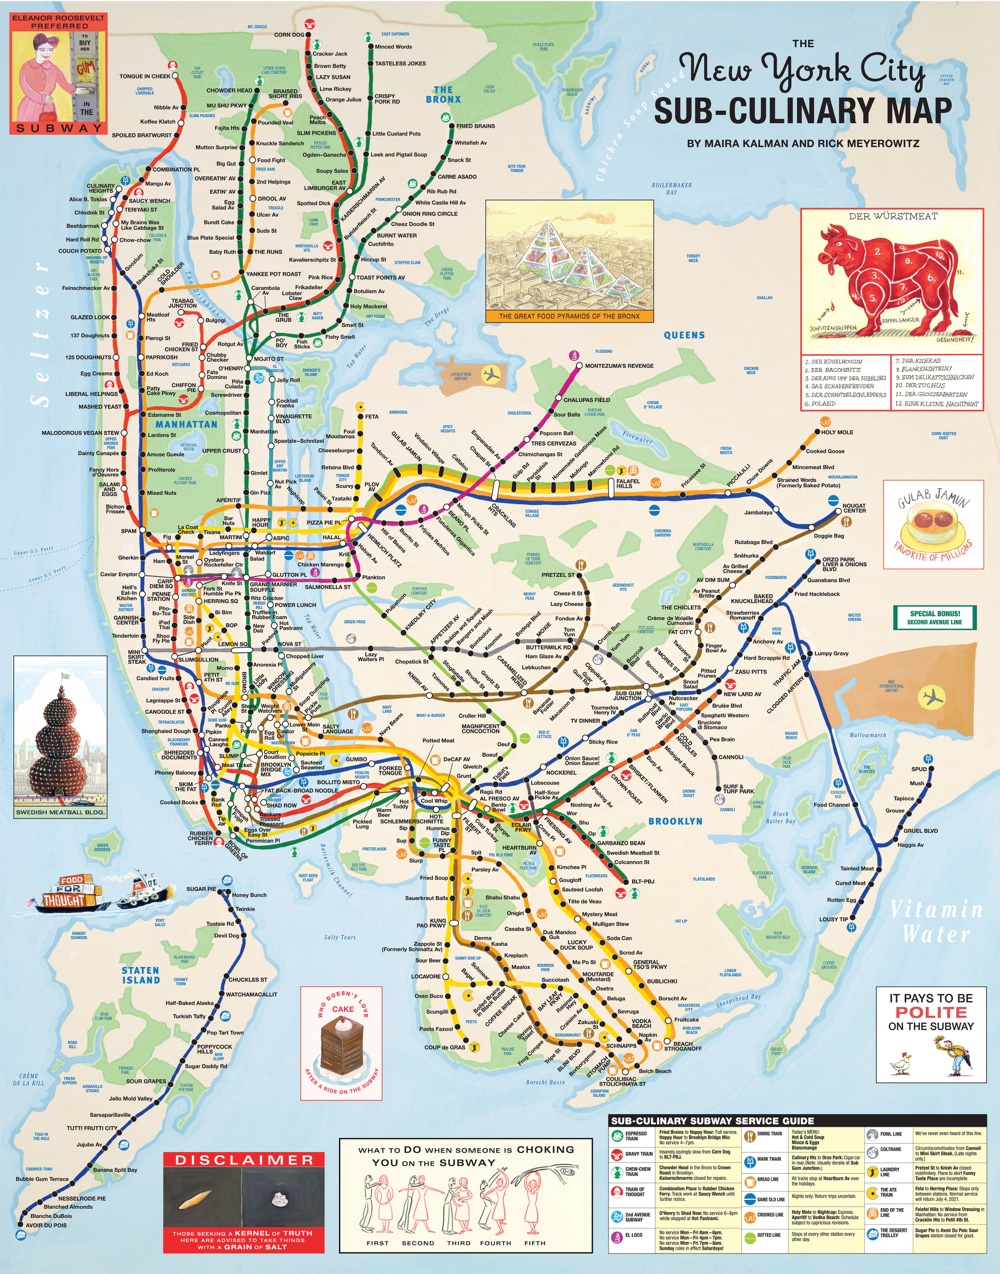 The New York City Sub-Culinary Map